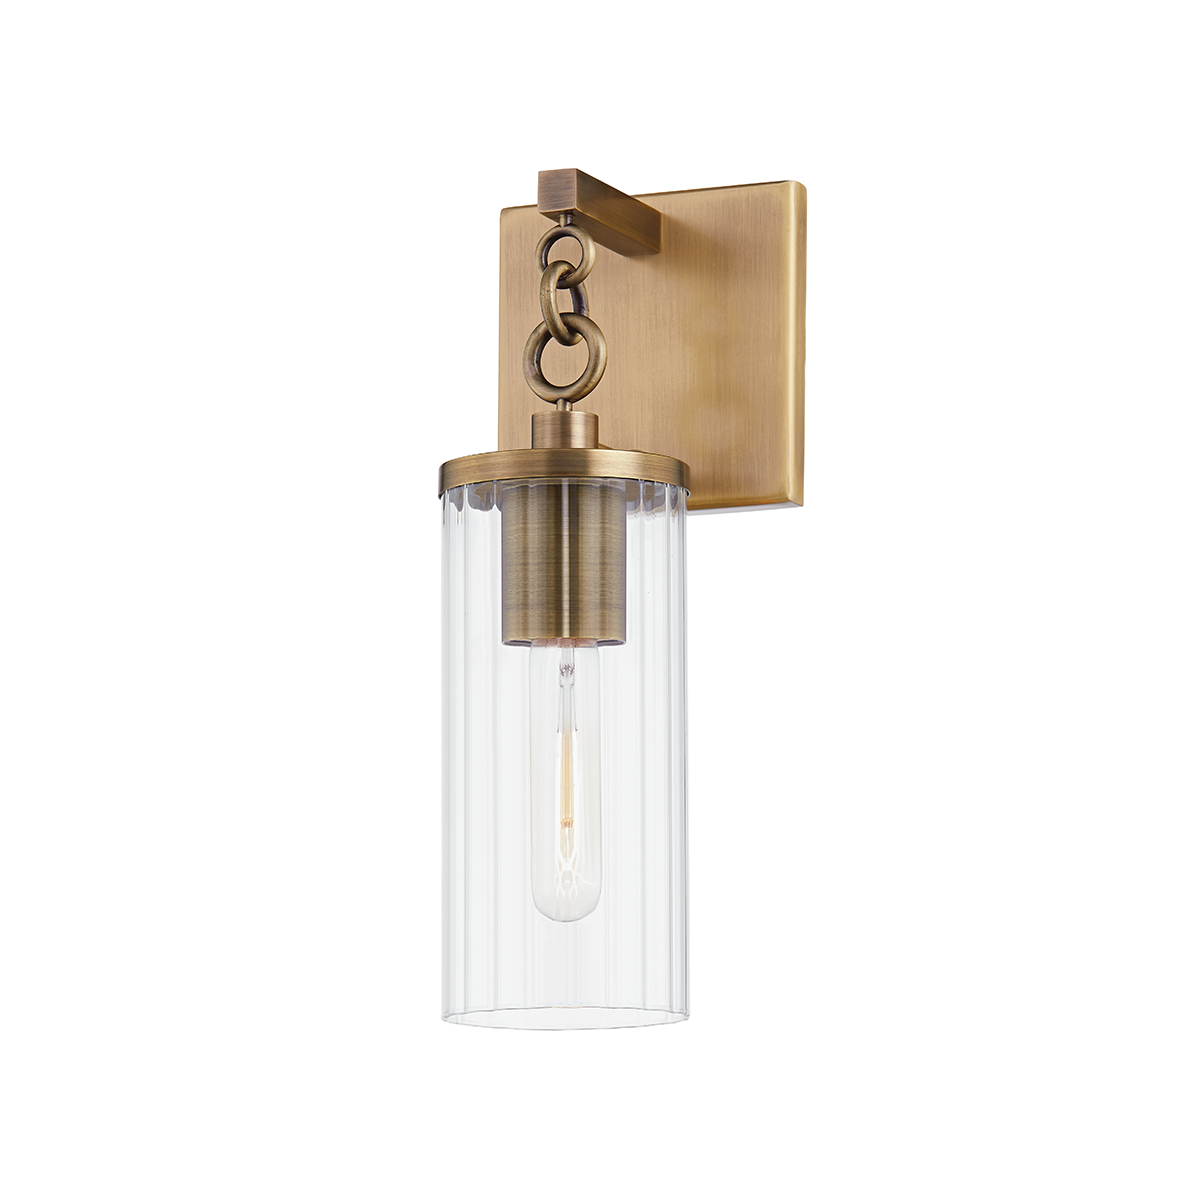 Troy Lighting 1 LIGHT SMALL EXTERIOR WALL SCONCE B6121